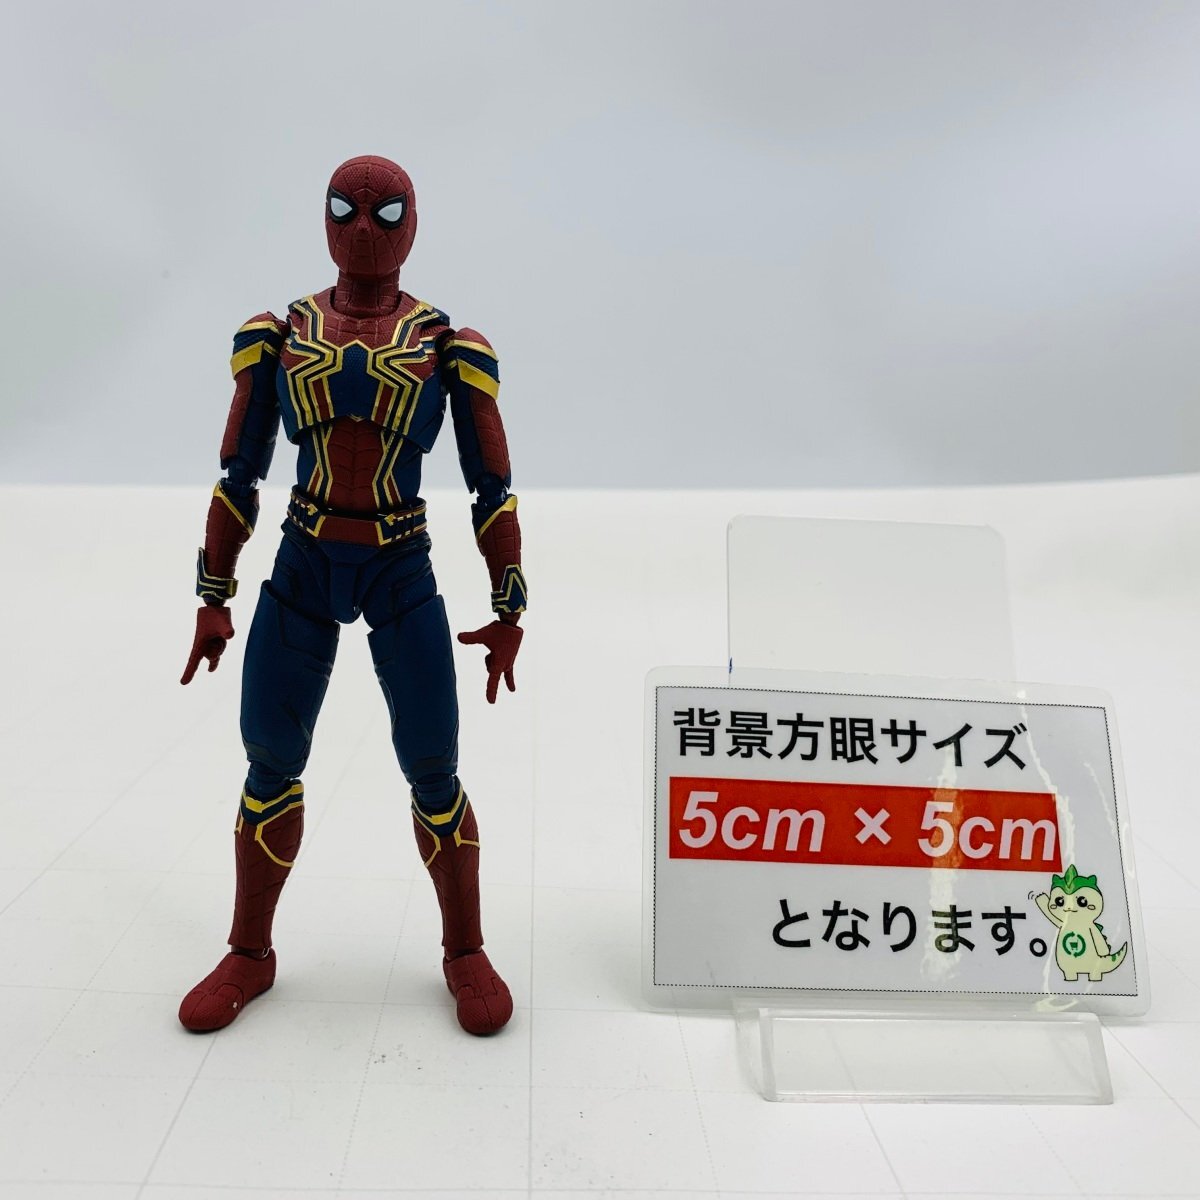  with defect secondhand goods S.H.Figuarts figuarts Avengers / Infinity * War iron * Spider 